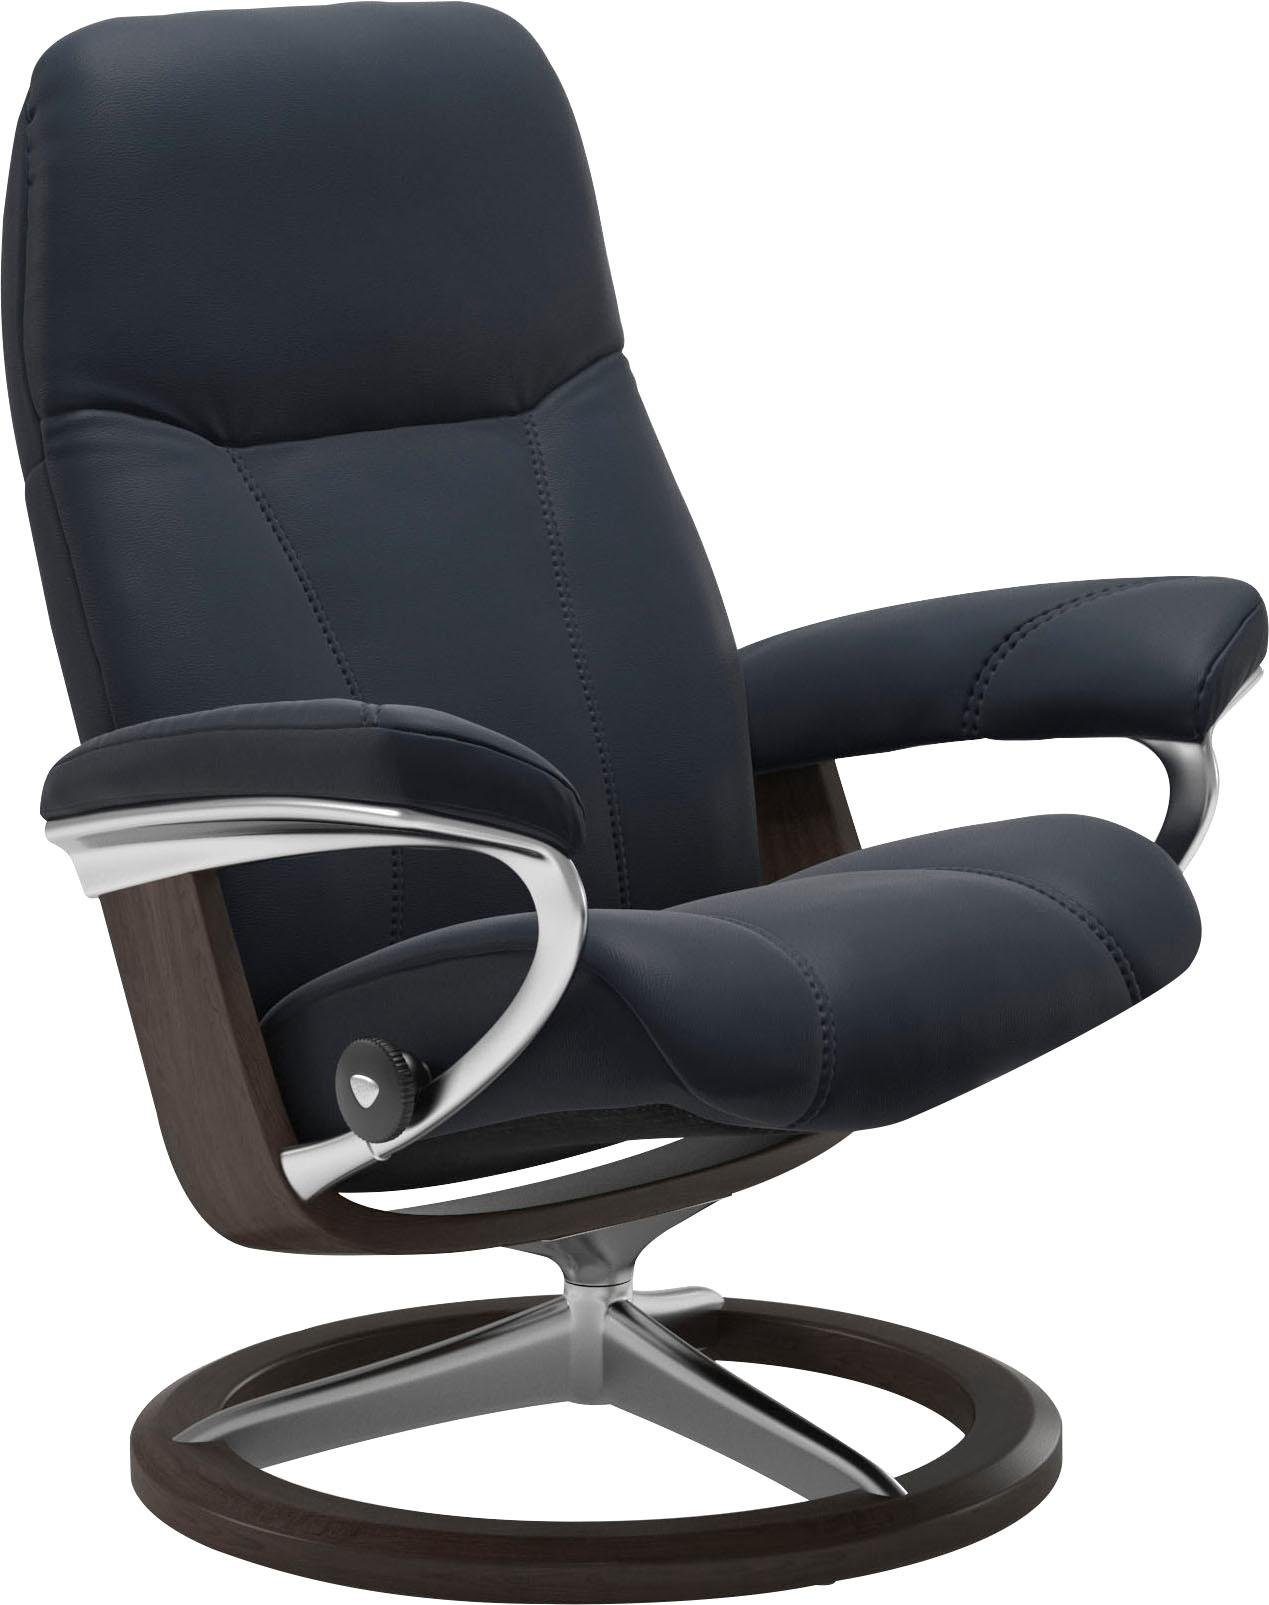 Stressless® Relaxsessel Consul, mit Wenge Gestell Signature S, Base, Größe